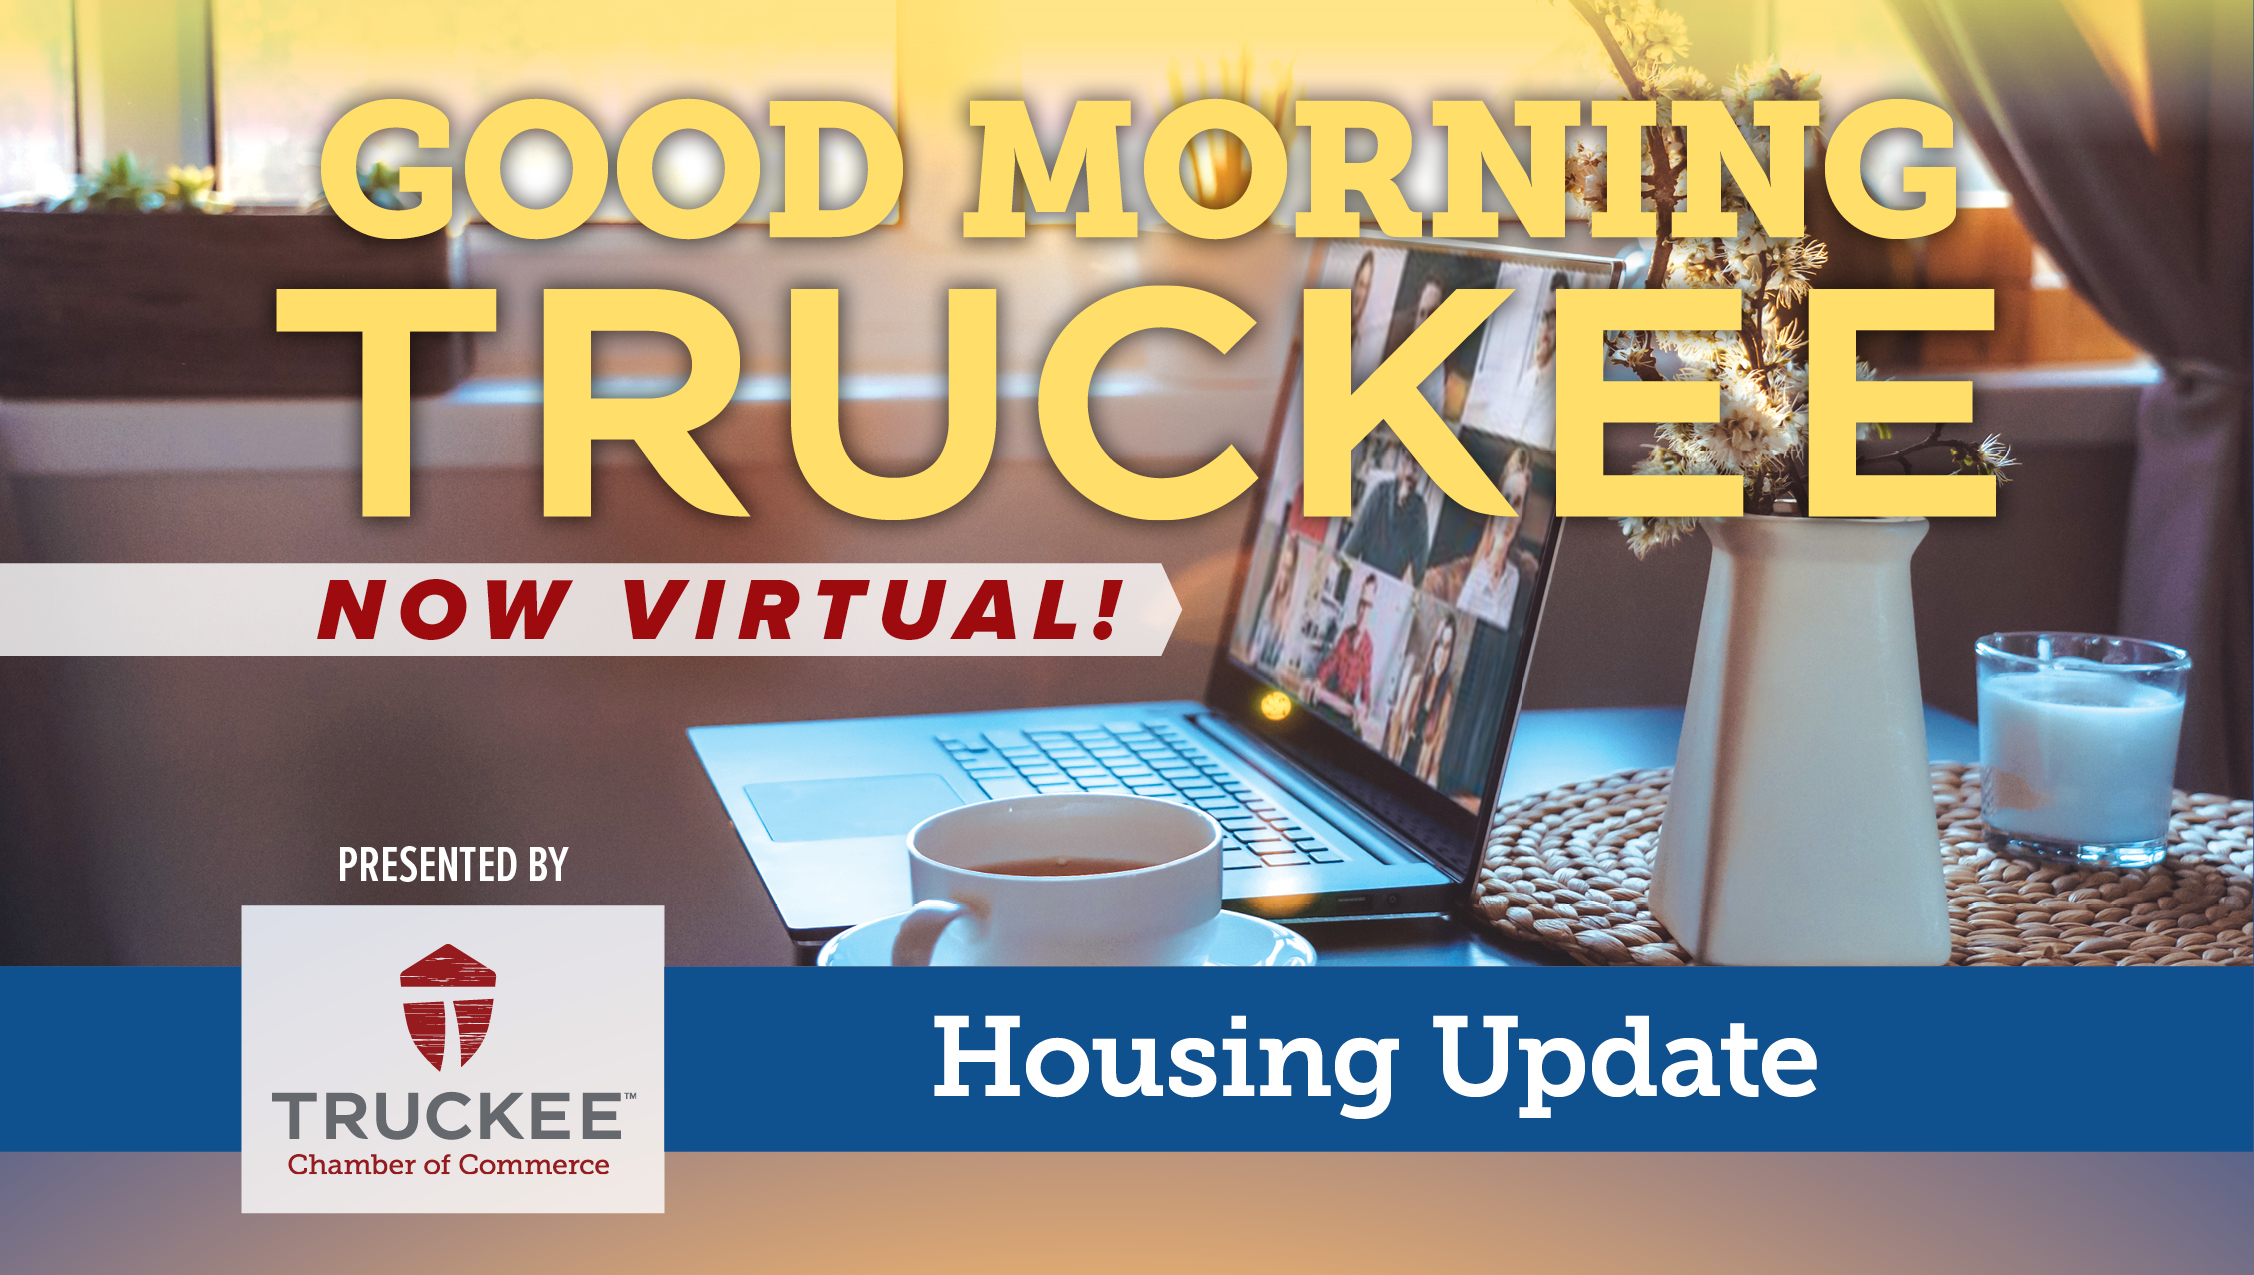 August 10, 2021 Recording: Good Morning Truckee - Housing Update